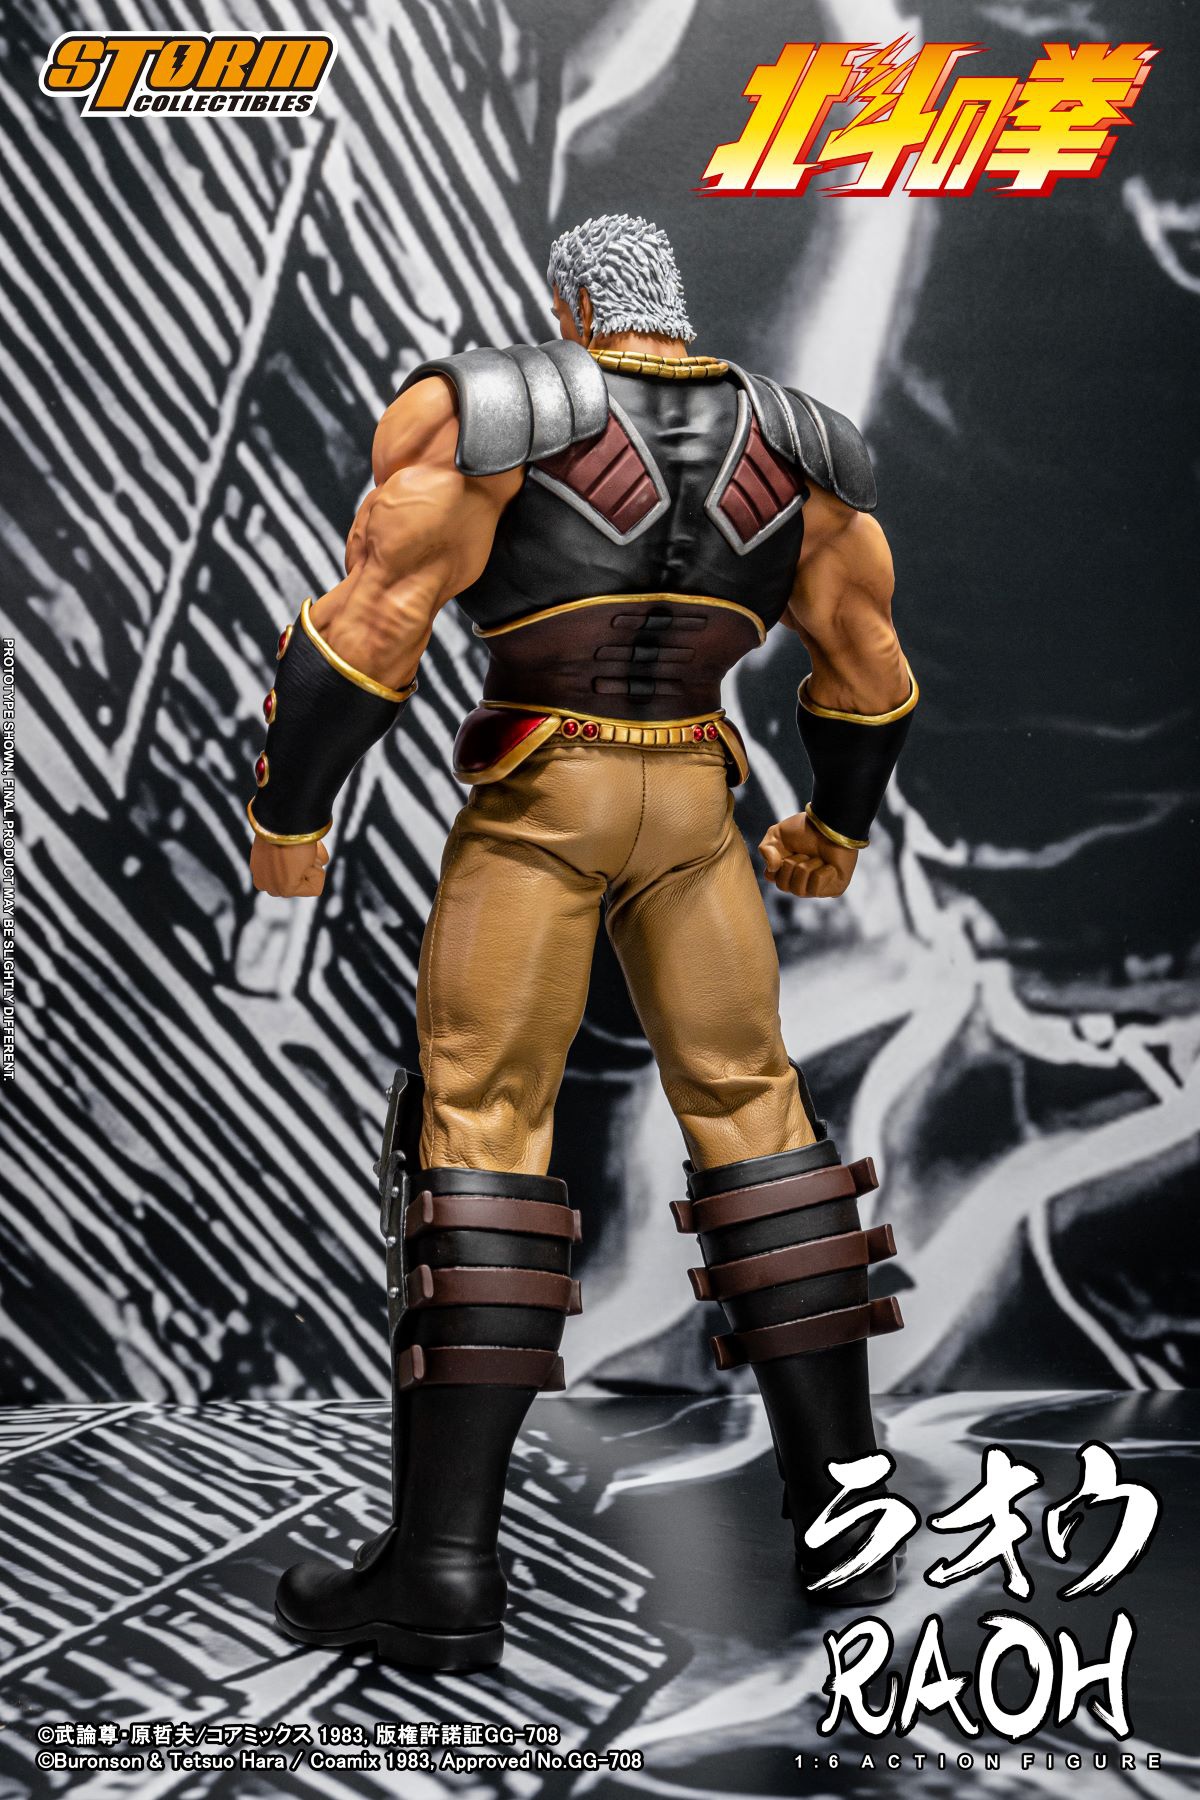 Male - NEW PRODUCT: Storm Collectibles - "Fist of the North Star" RAOH 04139